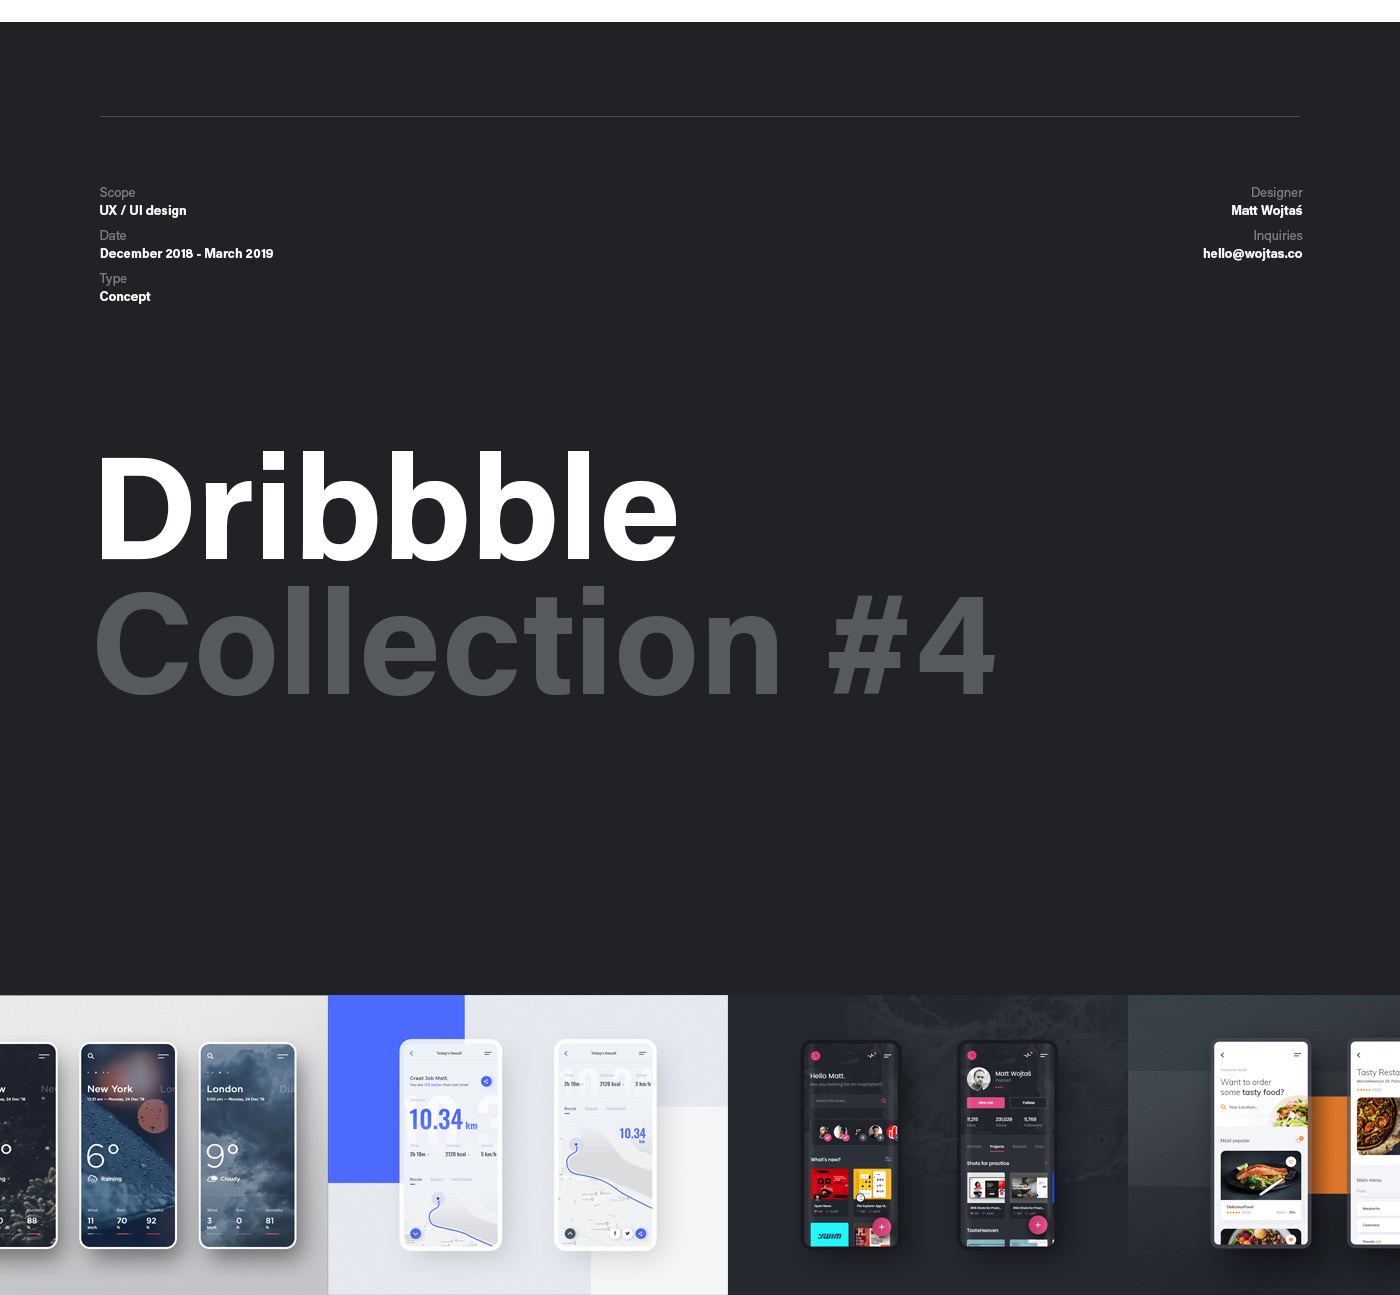 mobile dribbble inspiration concept application iphone phone android ios Collection